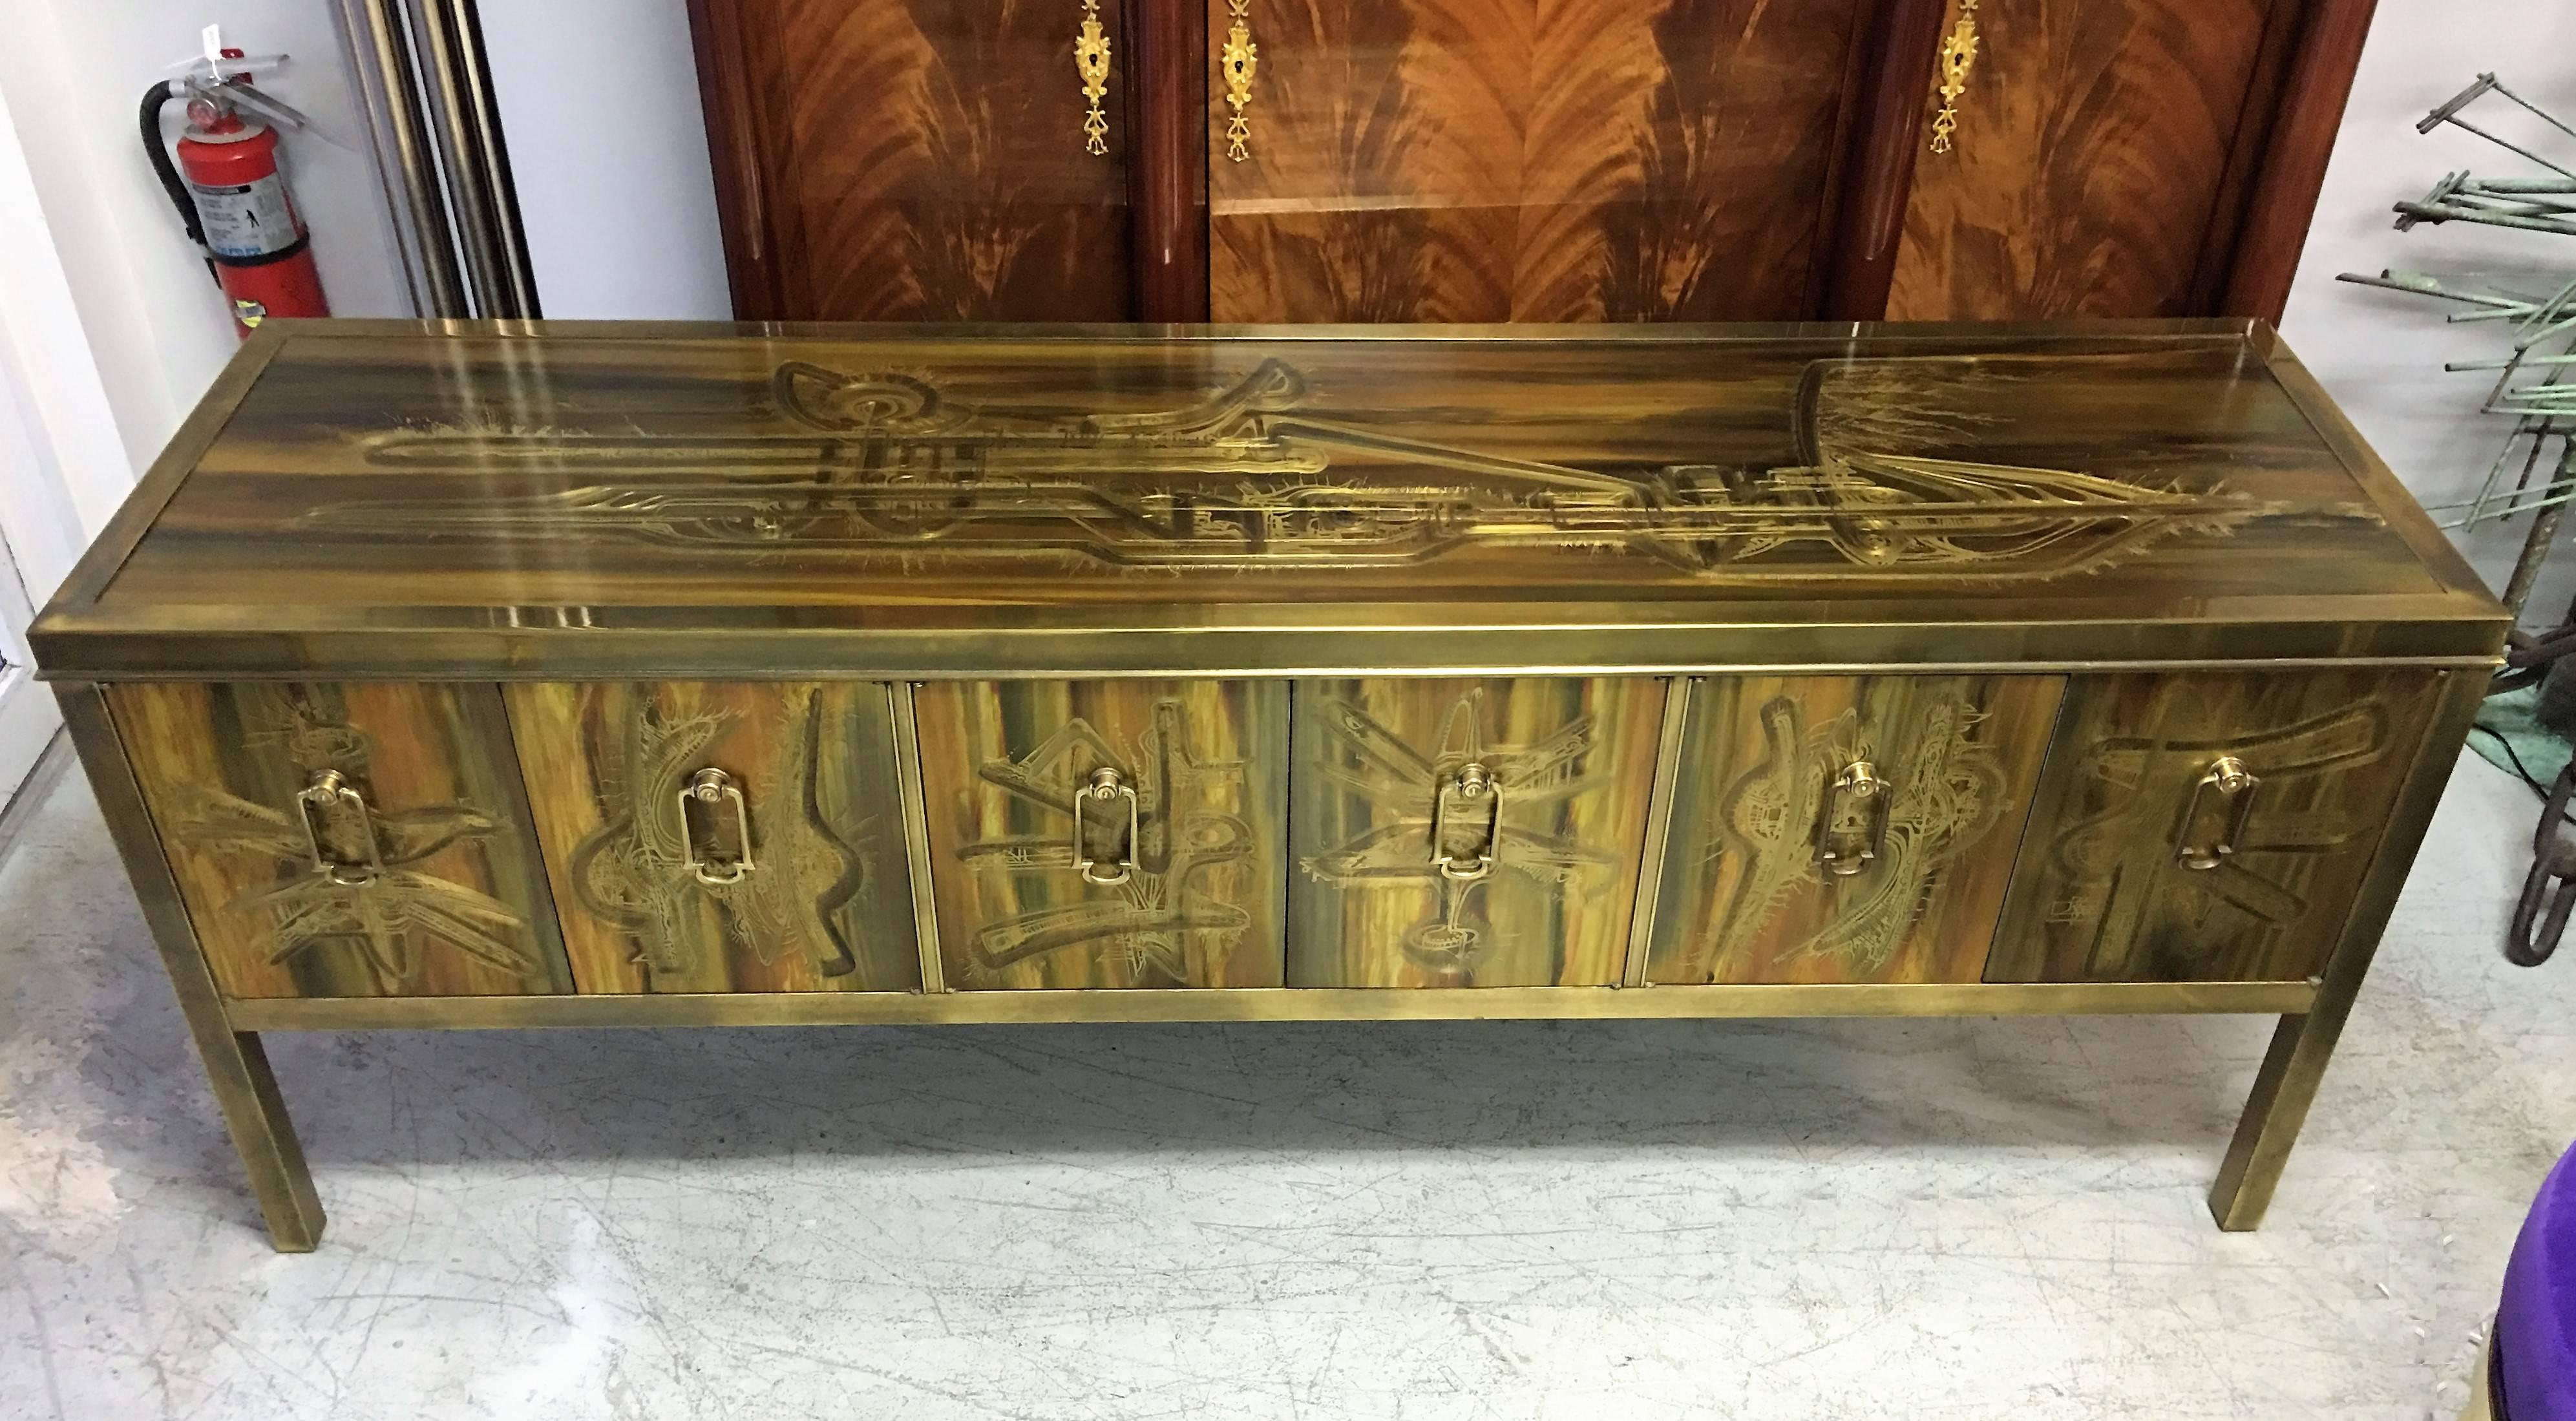 Stunning sideboard or credenza by Mastercraft, featuring the fantastic acid etched designs by Bernhard Rohne. Large brass pulls used to open six doors that reveal ample storage space.